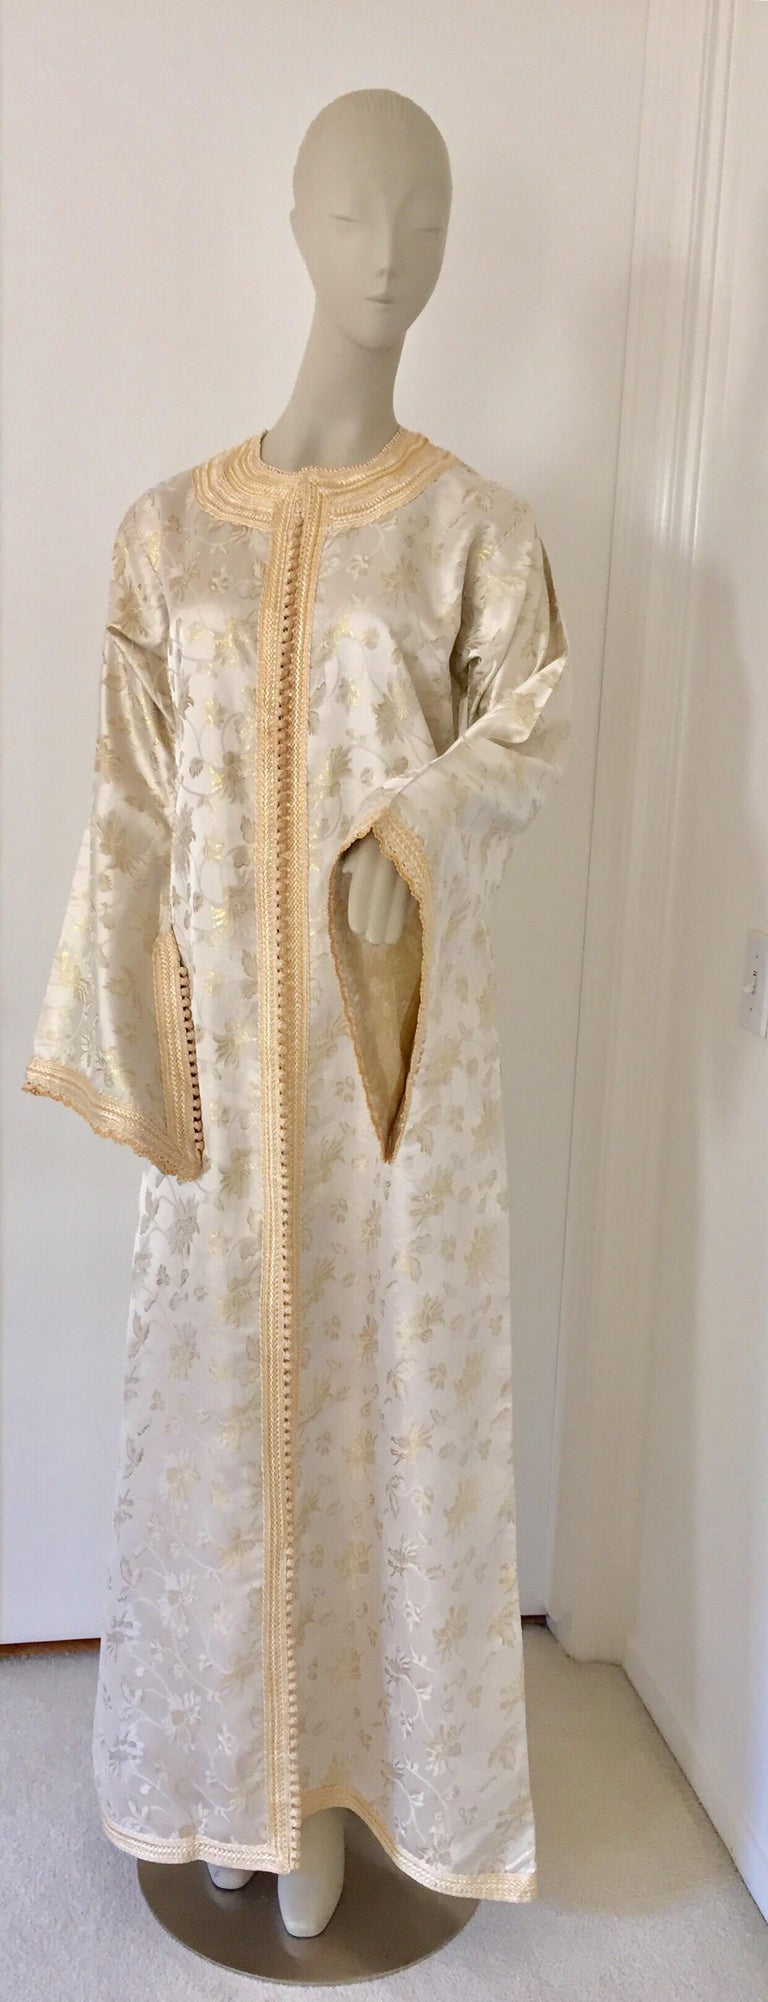 Beige Elegant Moroccan Caftan White and Gold Metallic Floral Brocade For Sale